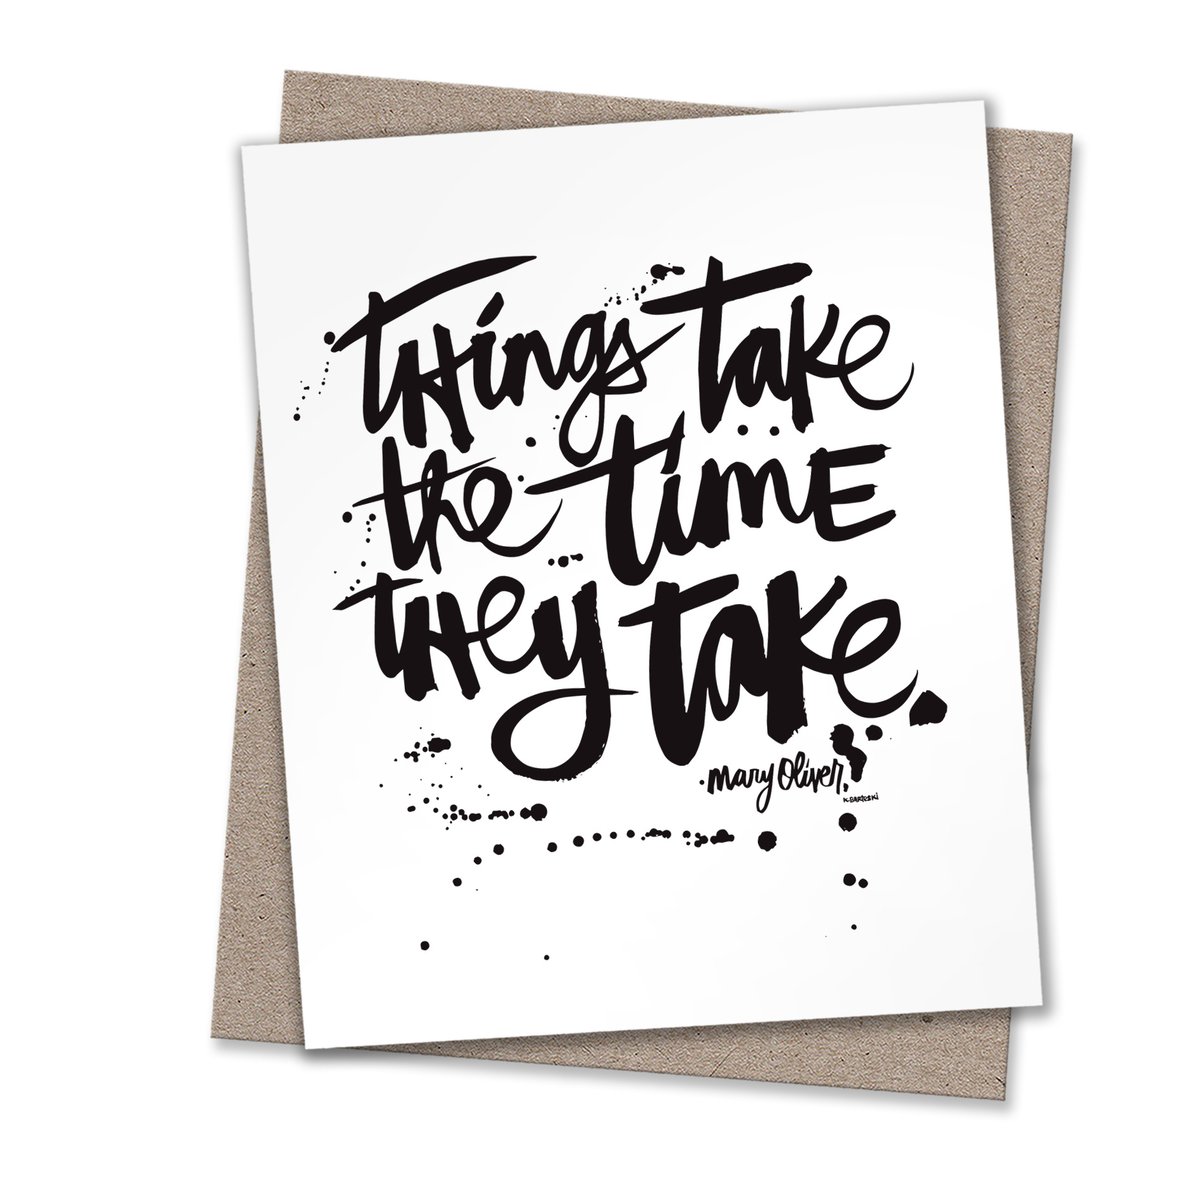 Image of THINGS TAKE THE TIME #kbscript print